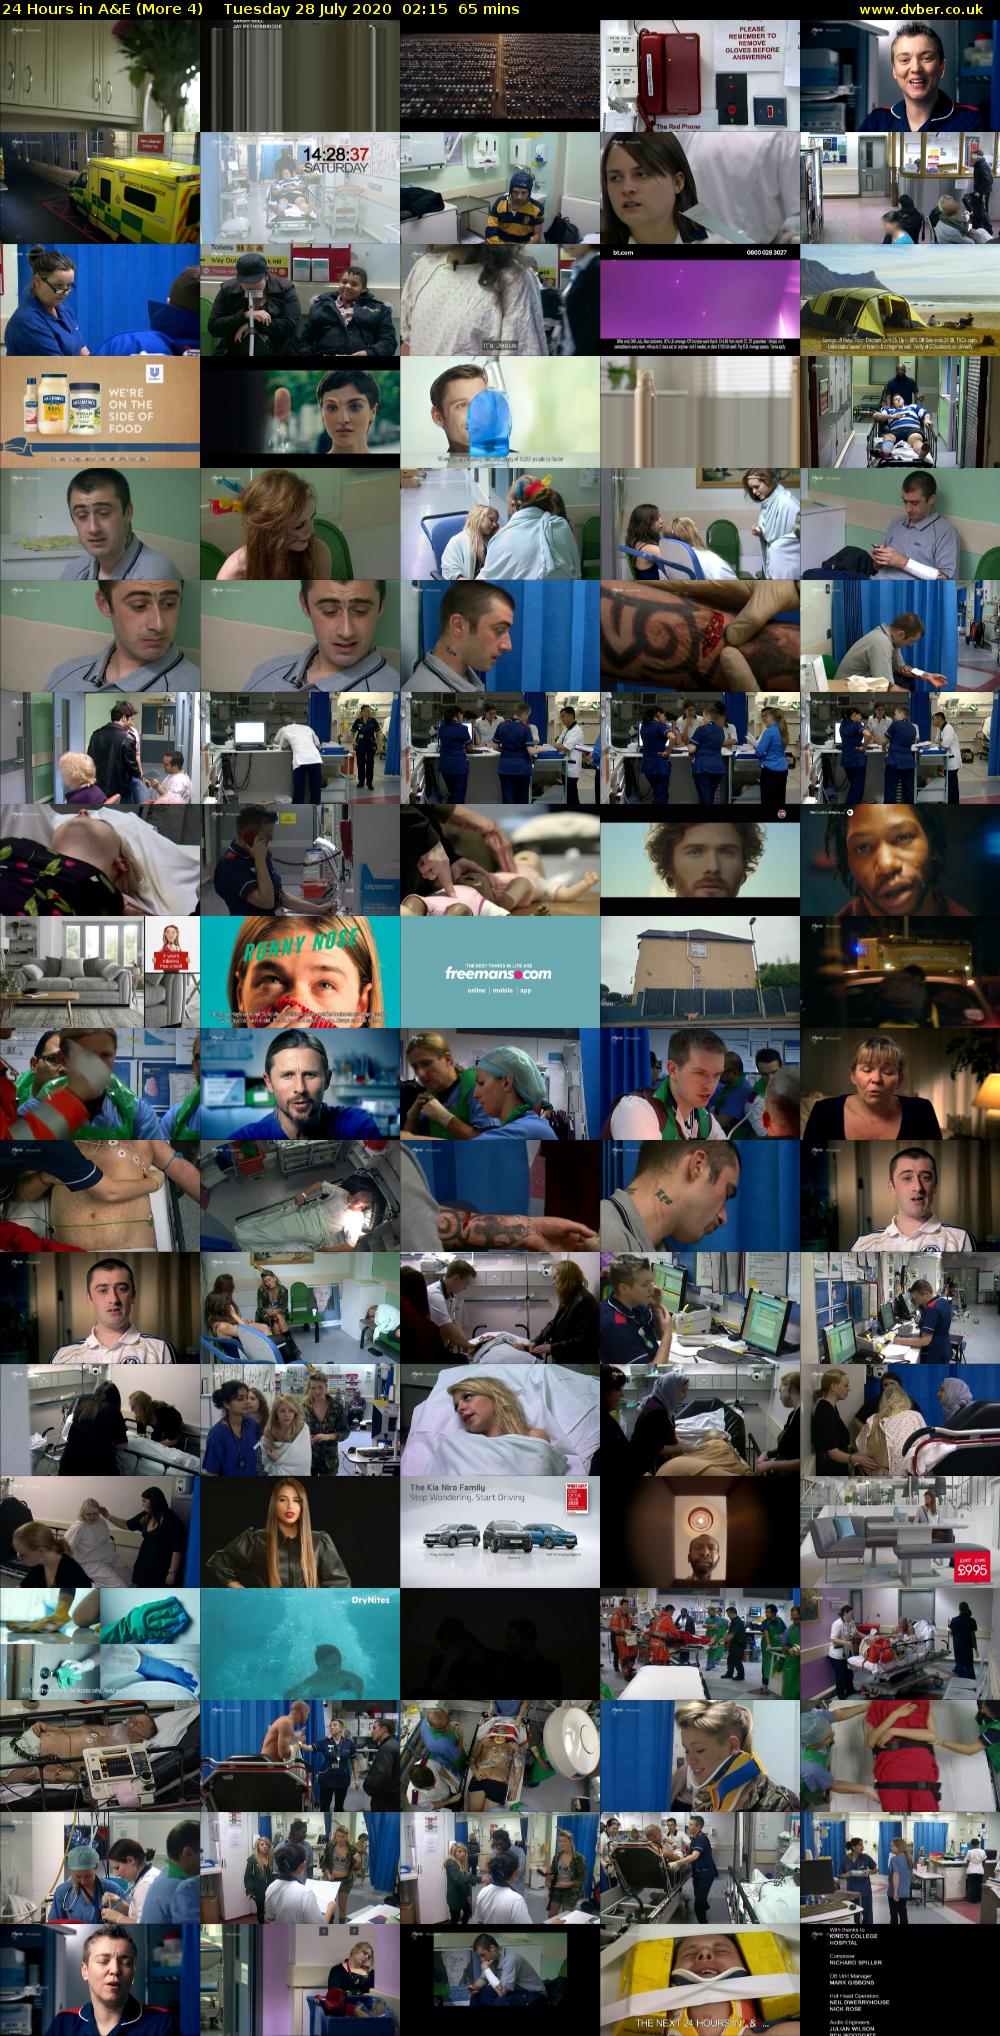 24 Hours in A&E (More 4) Tuesday 28 July 2020 02:15 - 03:20